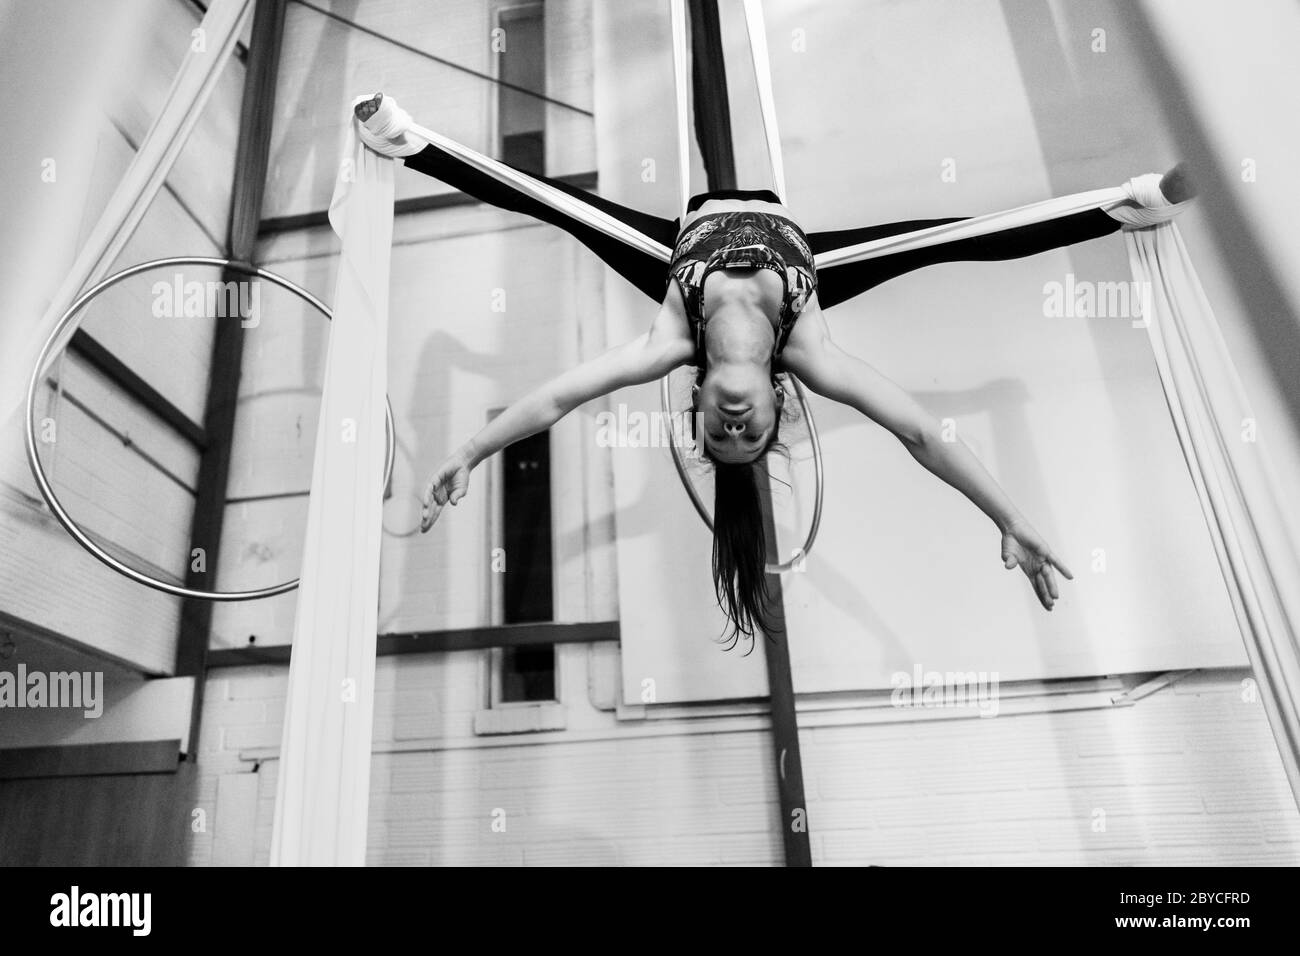 A Colombian aerial dancer performs a balance trick on aerial silks during a training session in a gym in Medellín, Colombia. Stock Photo